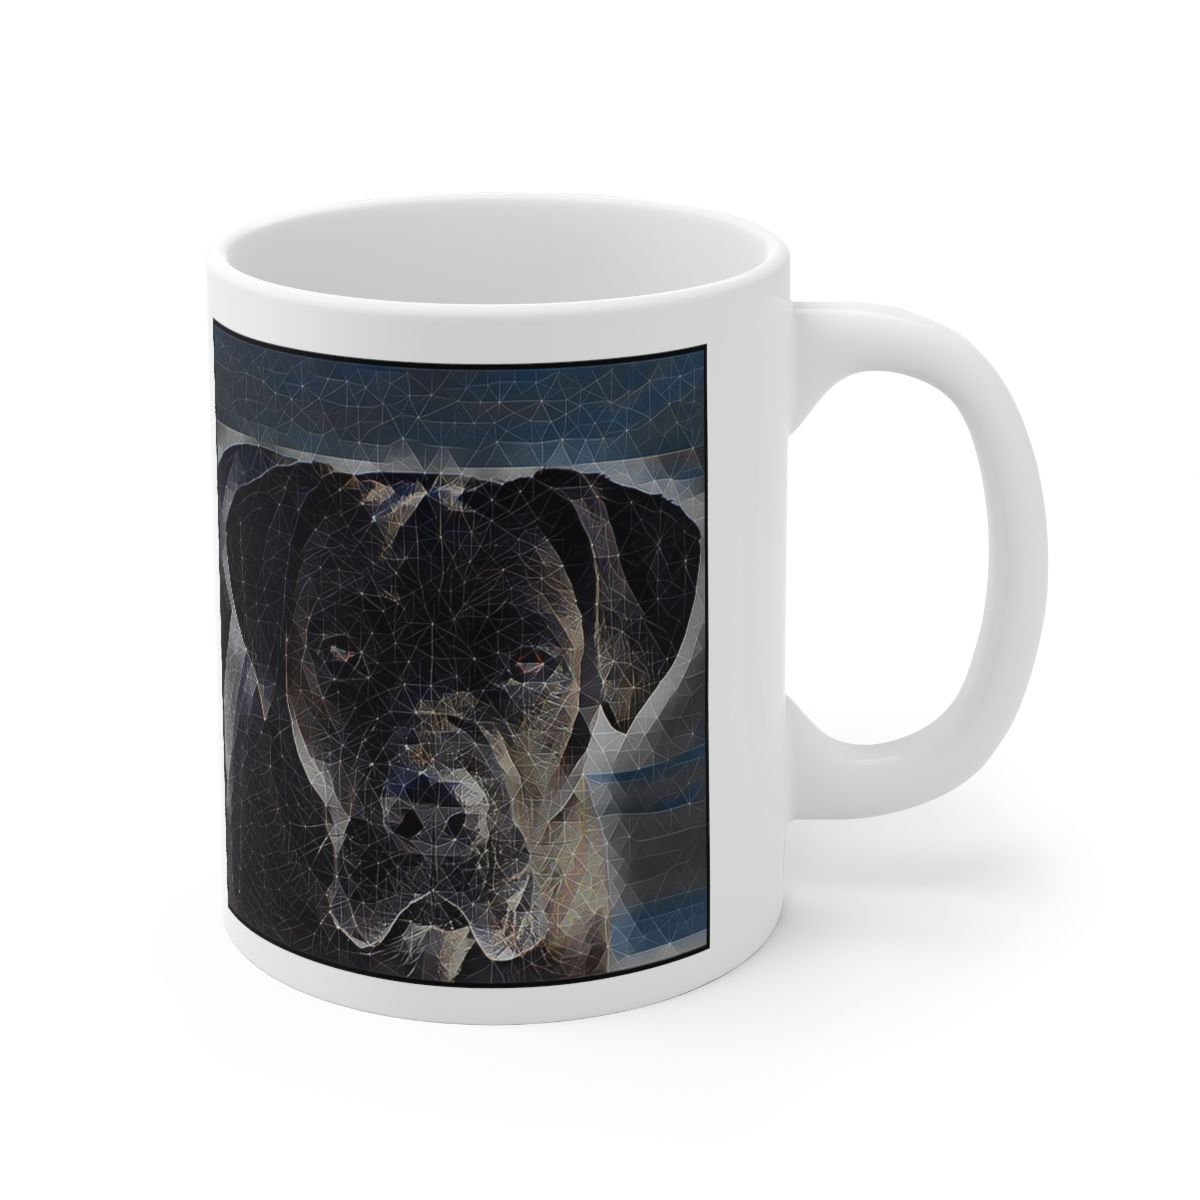 Picture of Cane Corso-Rock Candy Mug